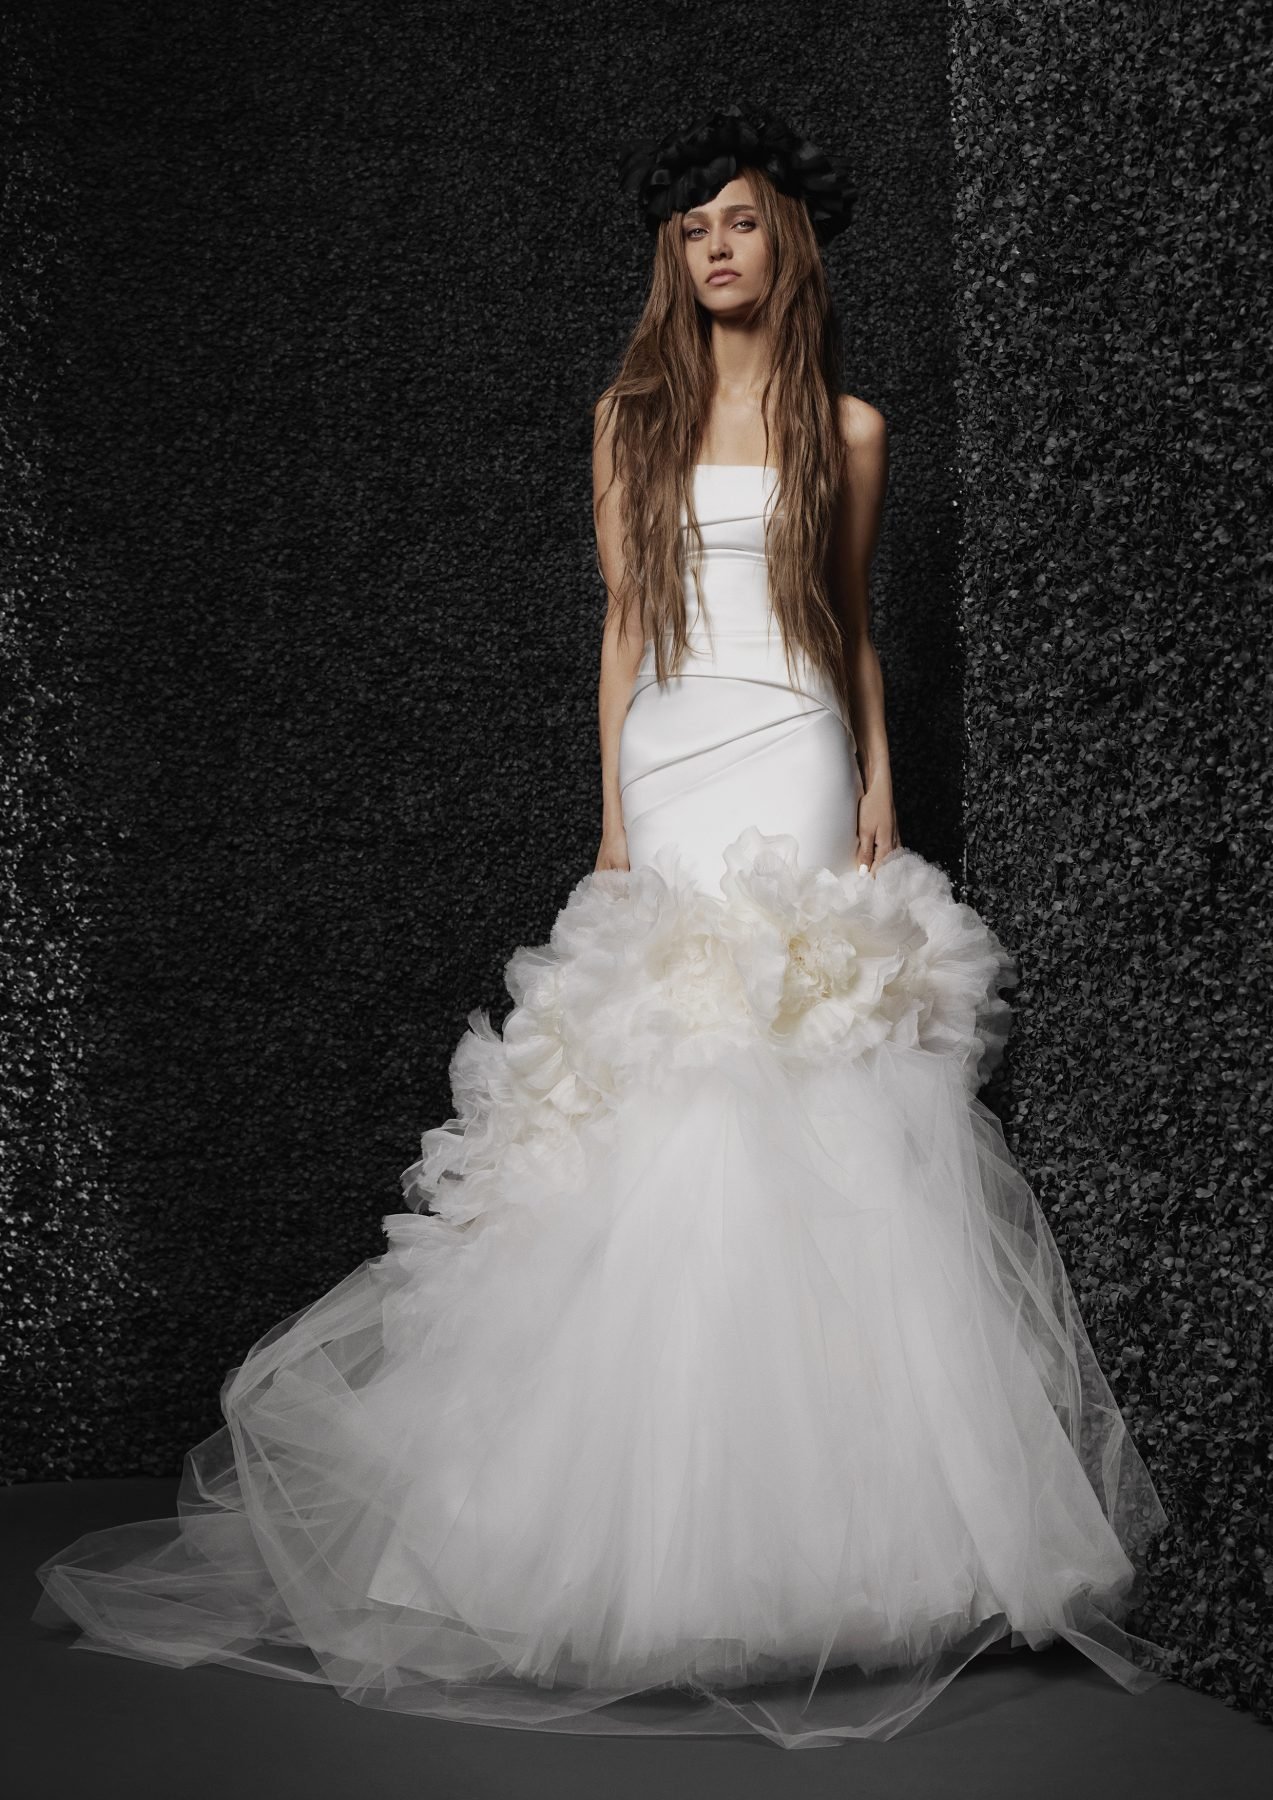 vera-wang-bride-strapless-silk-fit-and-flare-wedding-dress-with-tulle-skirt-and-organza-flowers-34434175-1273x1800.jpeg